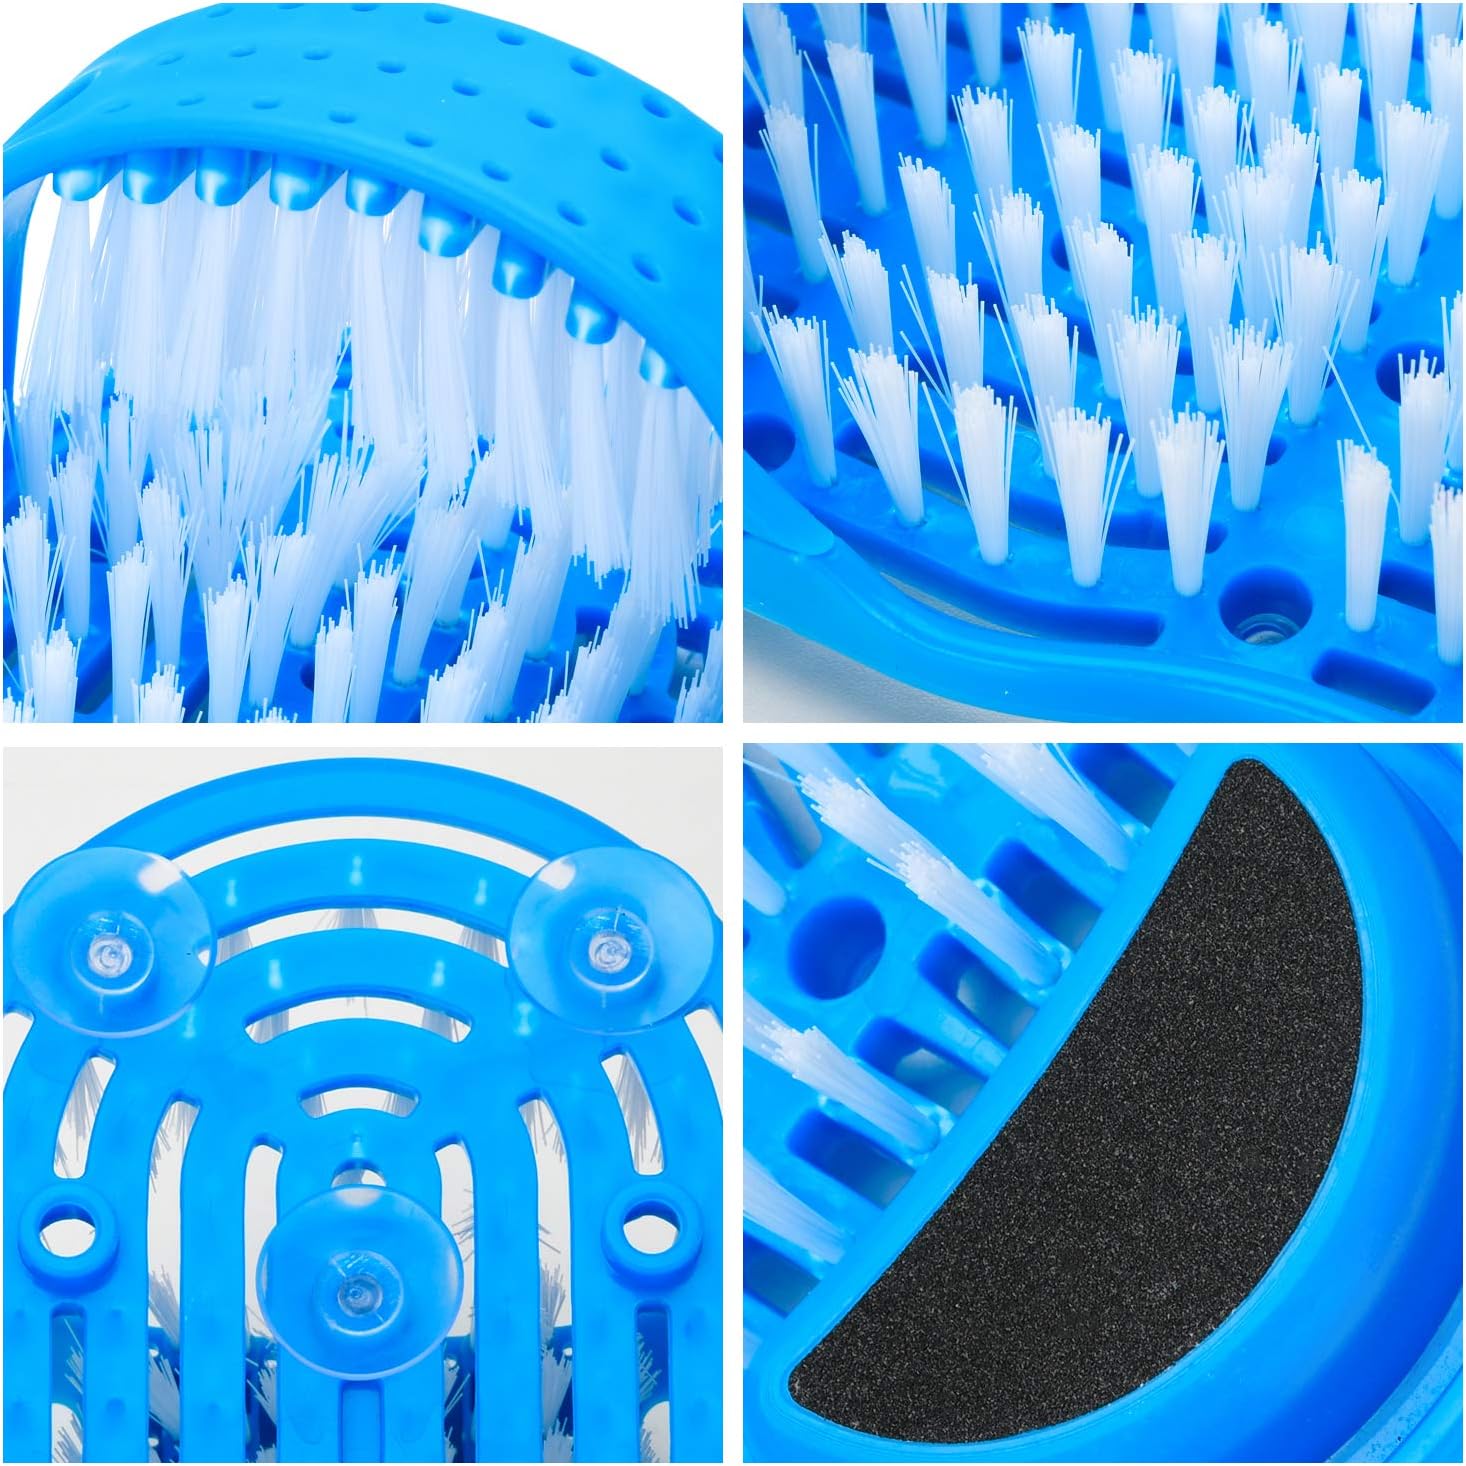 Simple Feet Cleaner, Feet Cleaning Brush, Foot Scrubber for Washer Shower Spa Massager Slippers